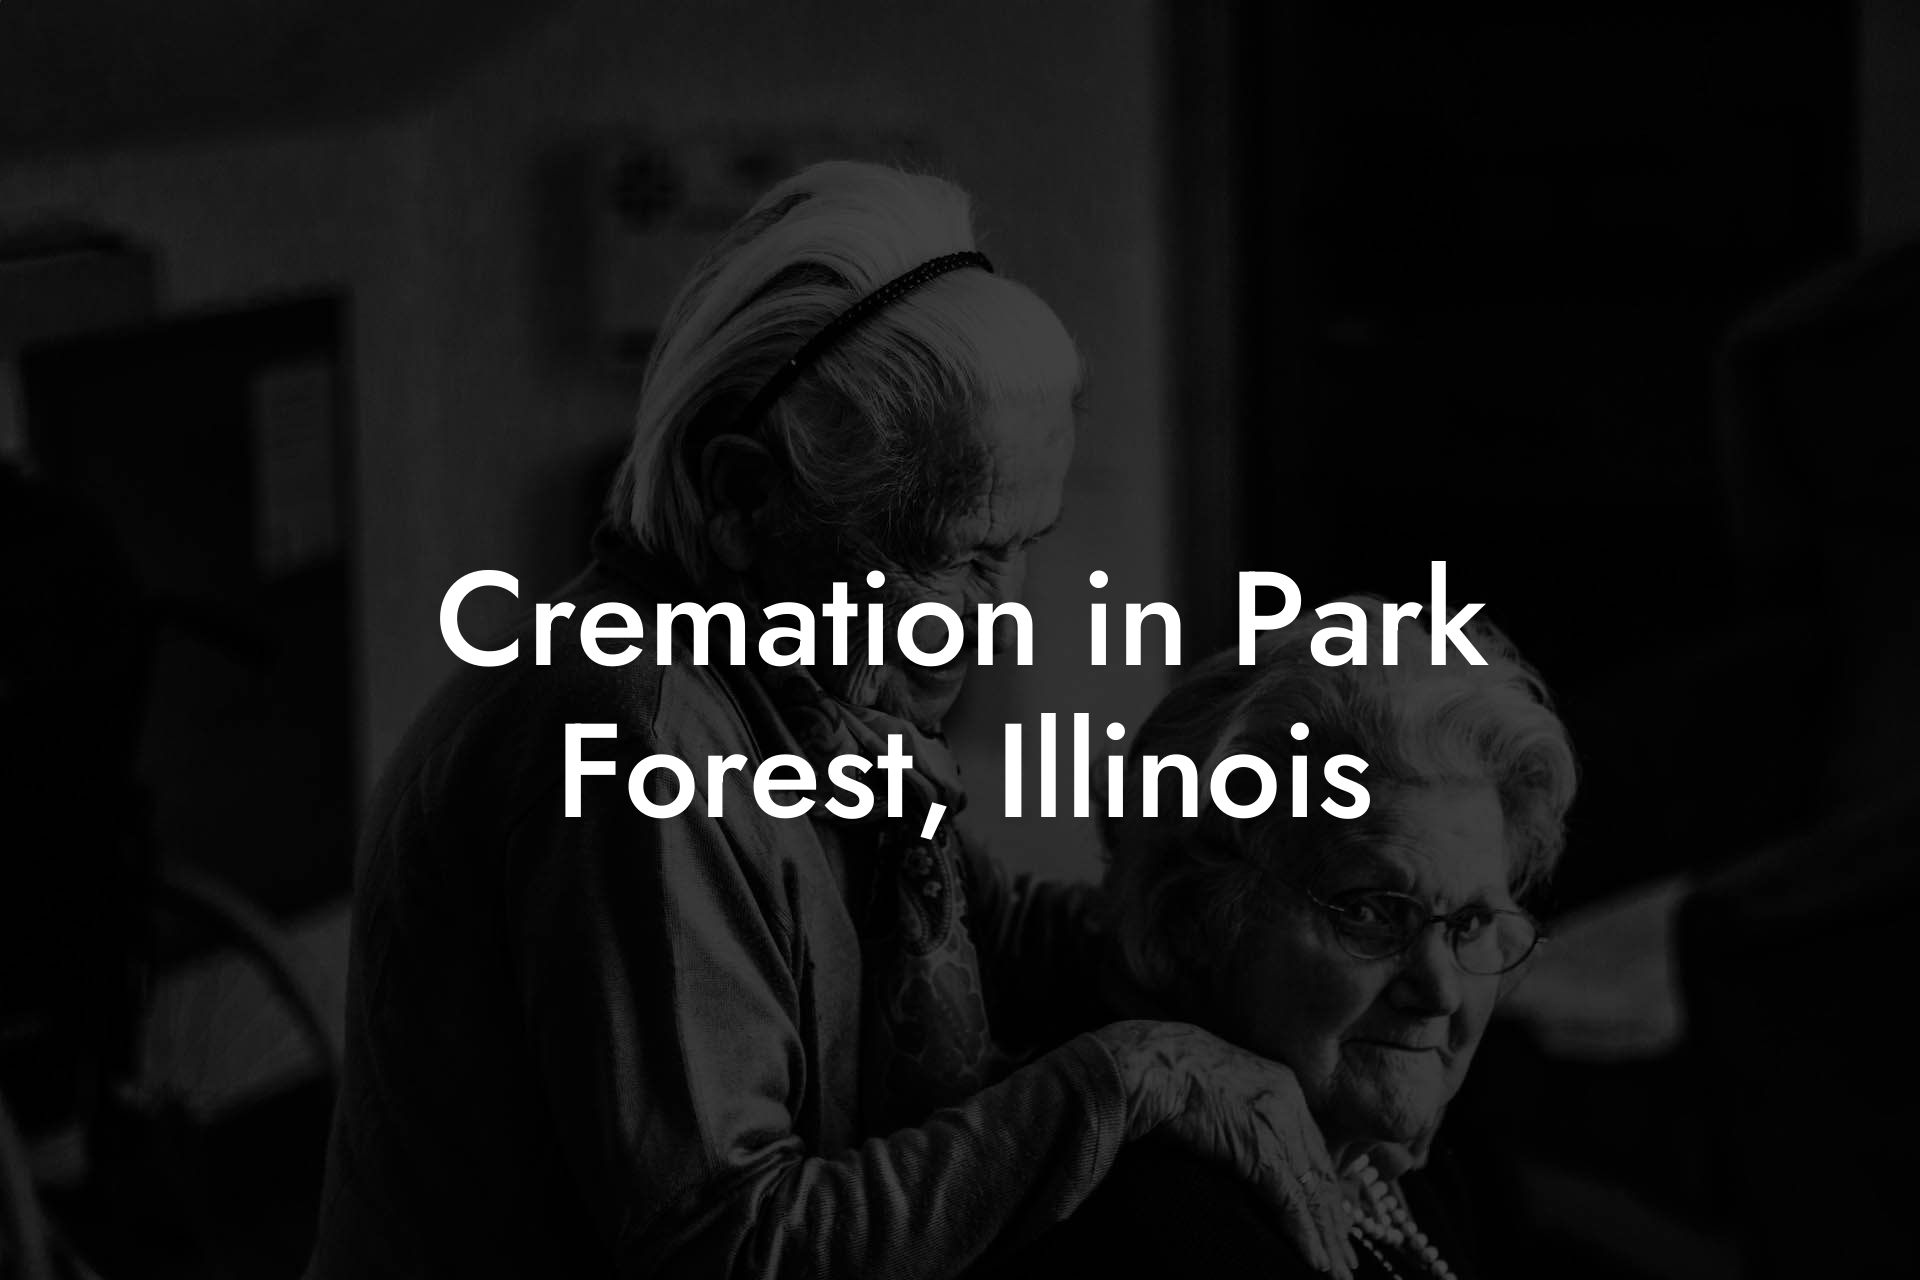 Cremation in Park Forest, Illinois